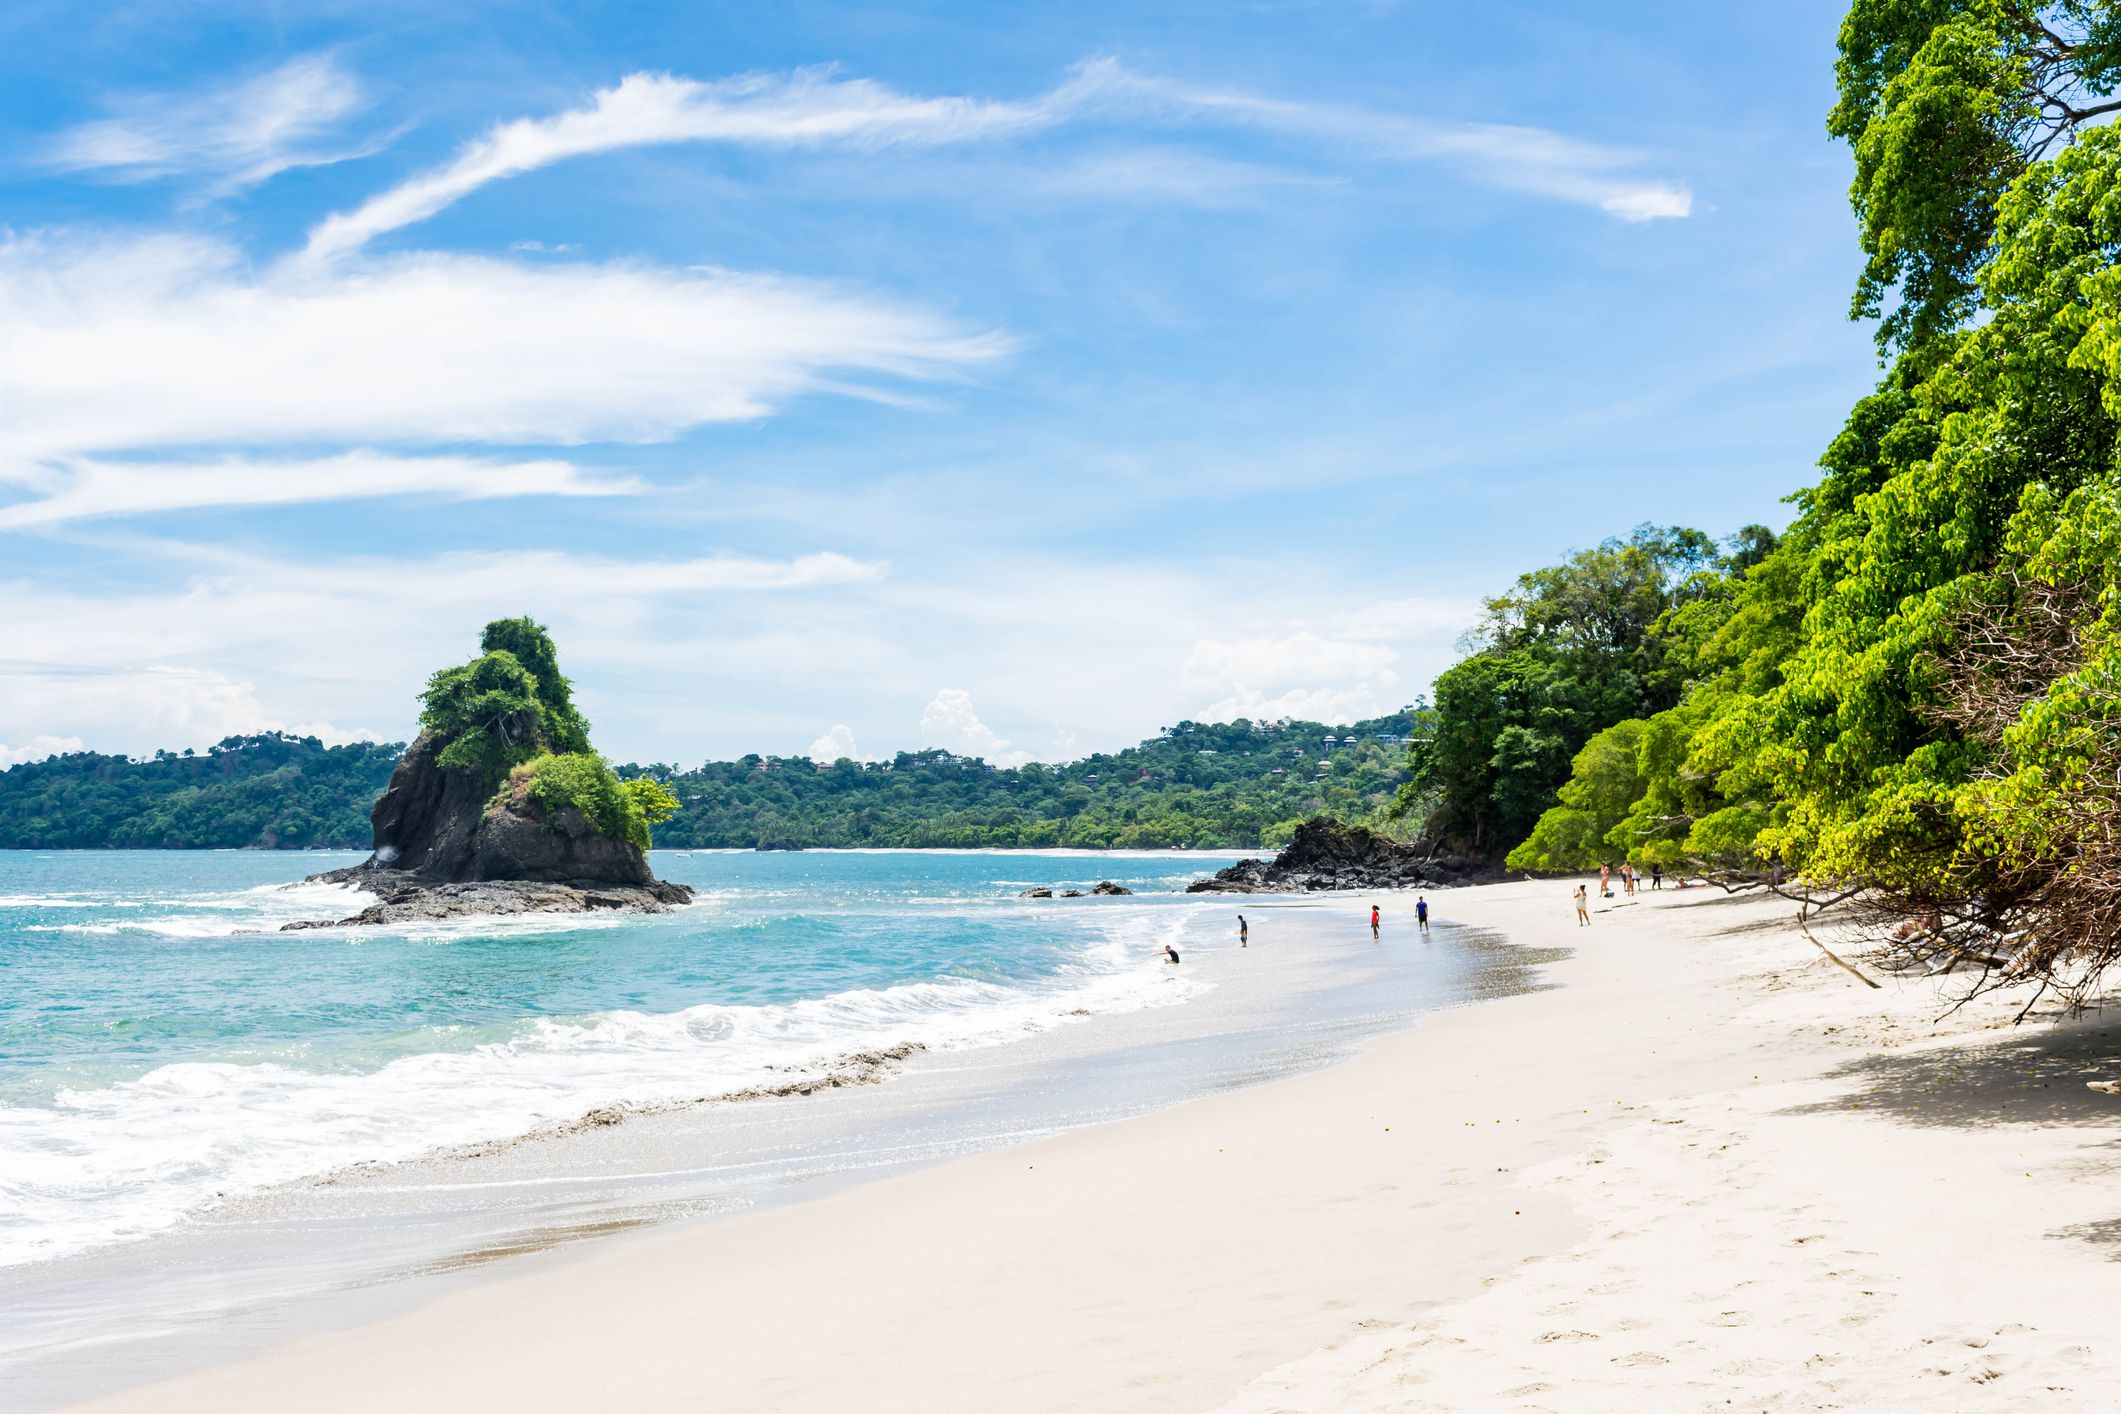 <p>If you’re learning <a href="https://www.sofi.com/learn/content/how-families-afford-to-travel/">how families afford to travel</a>, one of the ways they do so is by visiting locations that offer great experiences at reasonable prices. At Manuel Antonio National Park (<em>manuelantoniopark.com/</em>), you can reserve day passes and hike the trails, or you can book a variety of unique experiences, such as:</p><ul><li>ATV tours</li><li>Medicinal plants tours</li><li>Jungle night walks</li><li>Zip line</li><li>Whale watching</li></ul><p>Prices start at around $40 for kids and $60 for adults for a guided tour.</p>